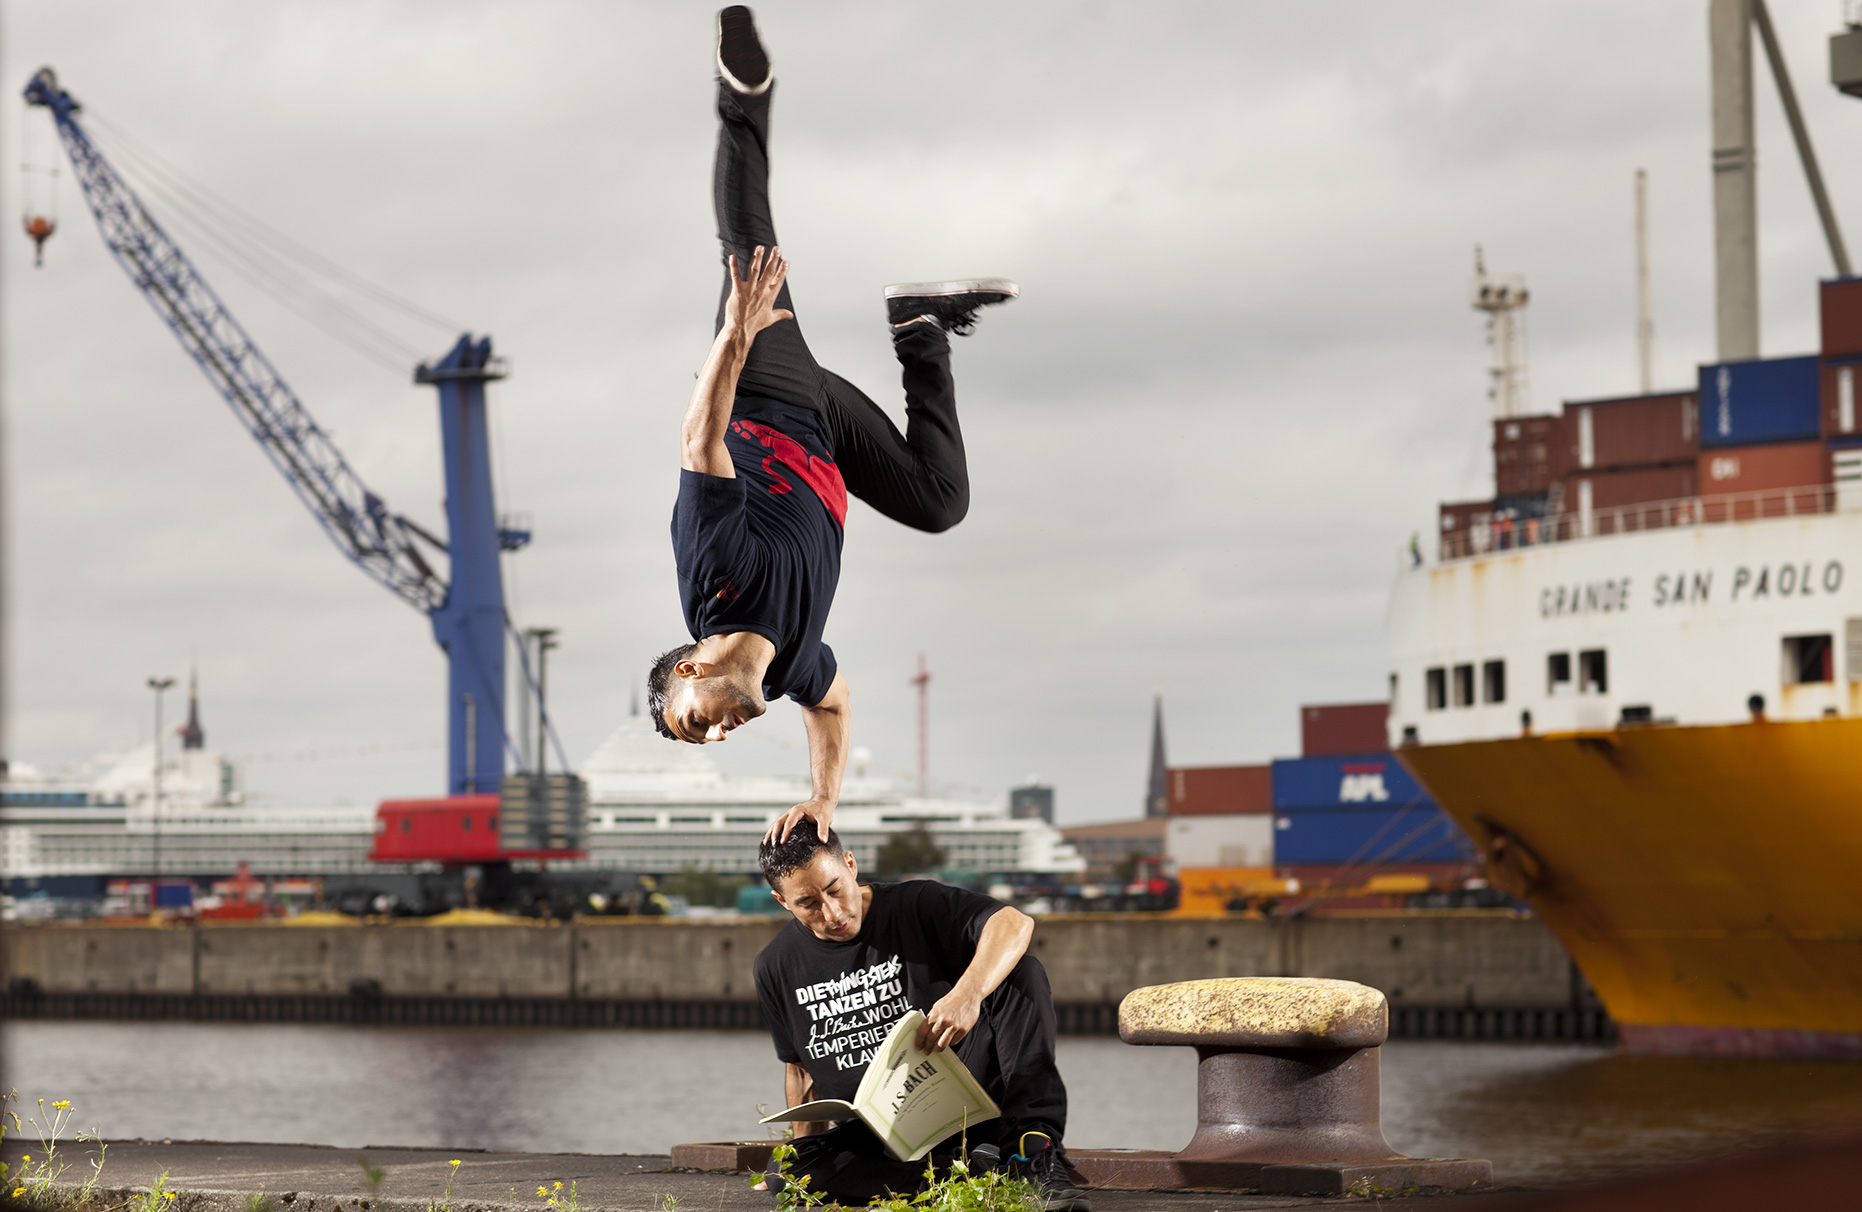 © Dirk Mathesius, Benny & Gengis from Flying Steps Crew, during Flying Illusion Tour, client Red Bull, Hamburg